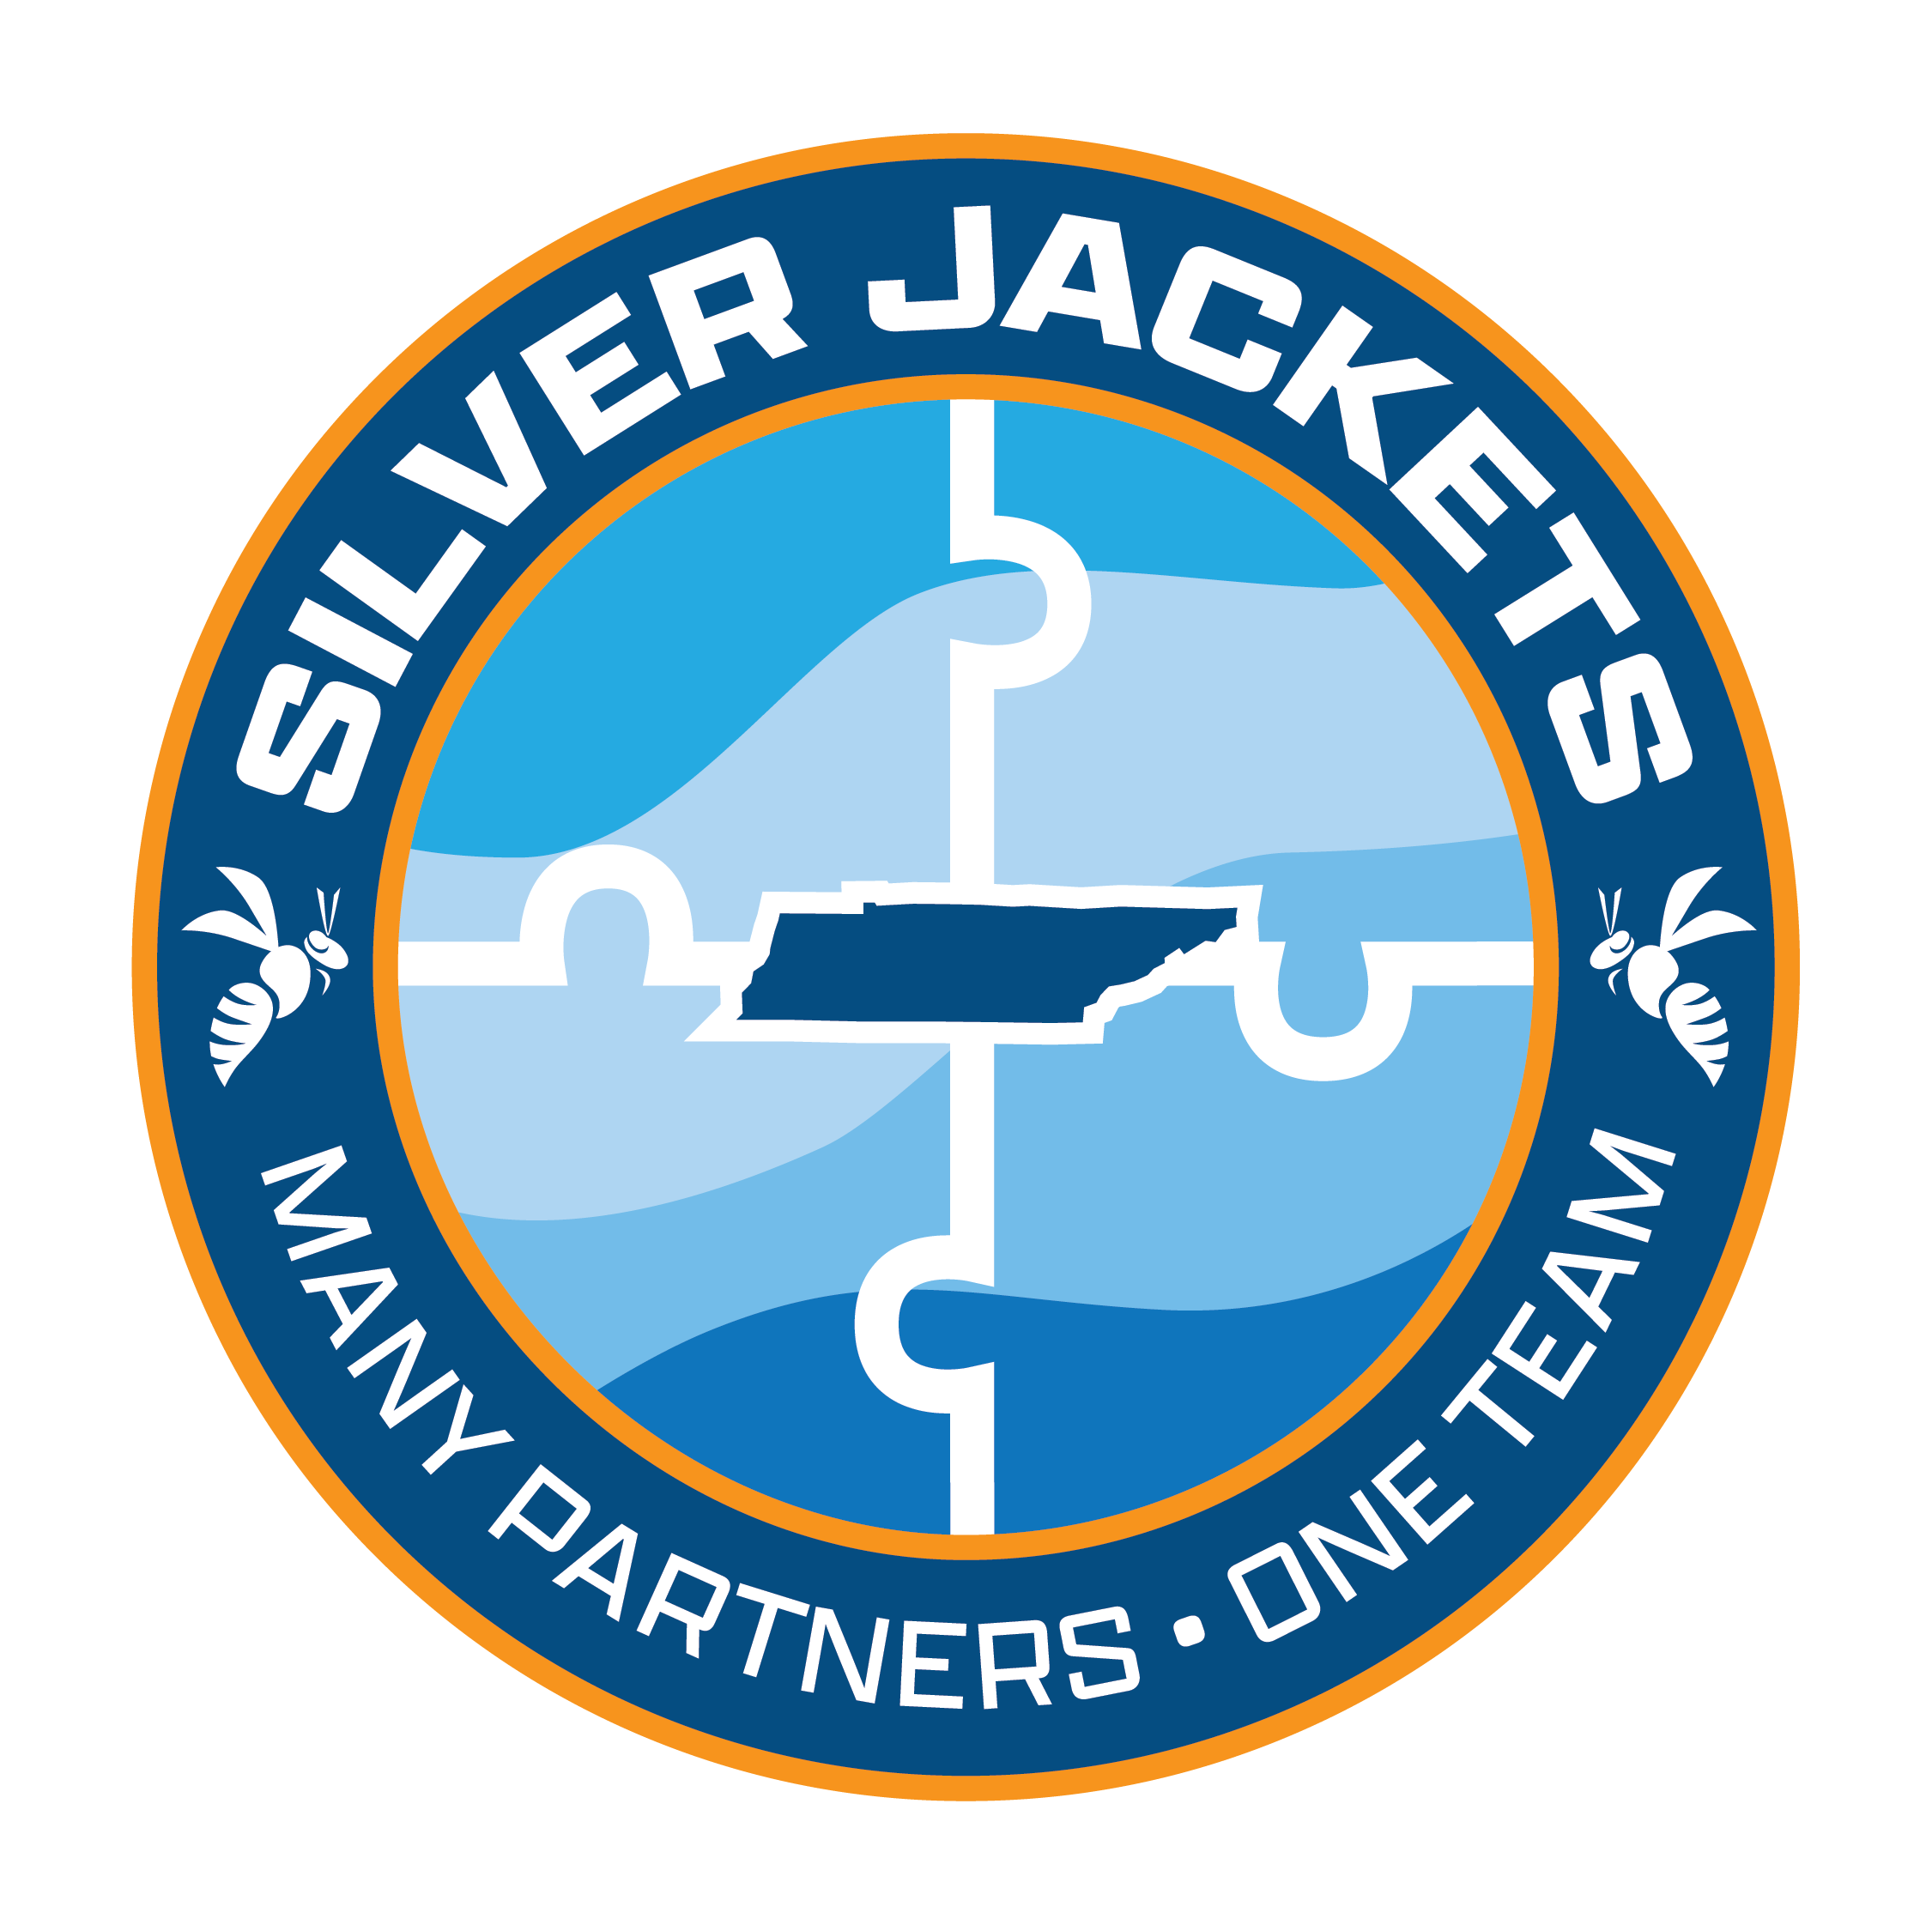 Tennessee Silver Jackets logo